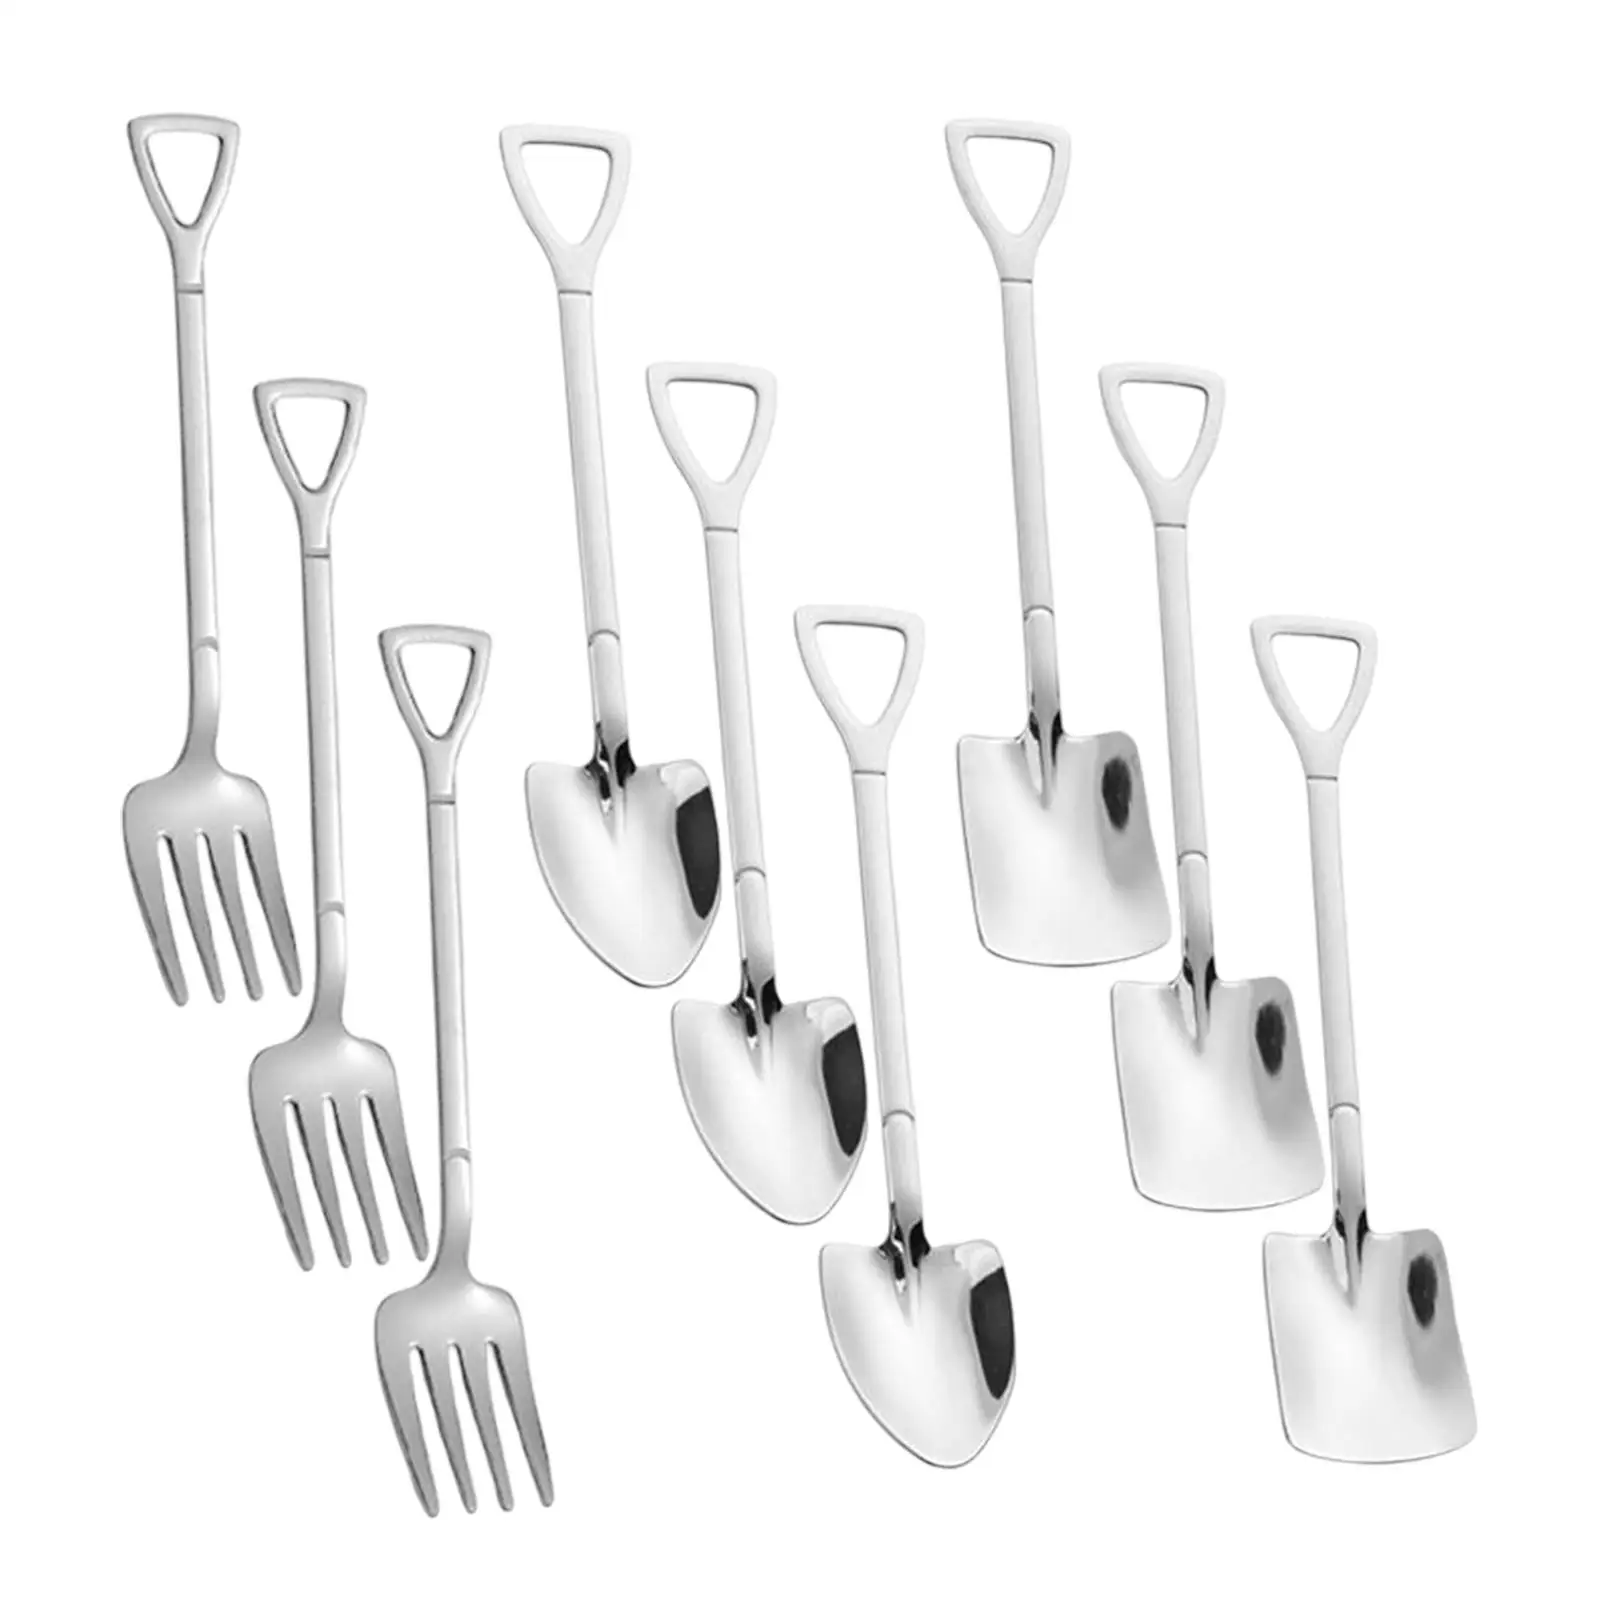 9x Kitchen Cutlery Set Espresso Spoons Dinnerware Tableware Spoons Tableware for Wedding Dining Room Christmas Hotel Cafe